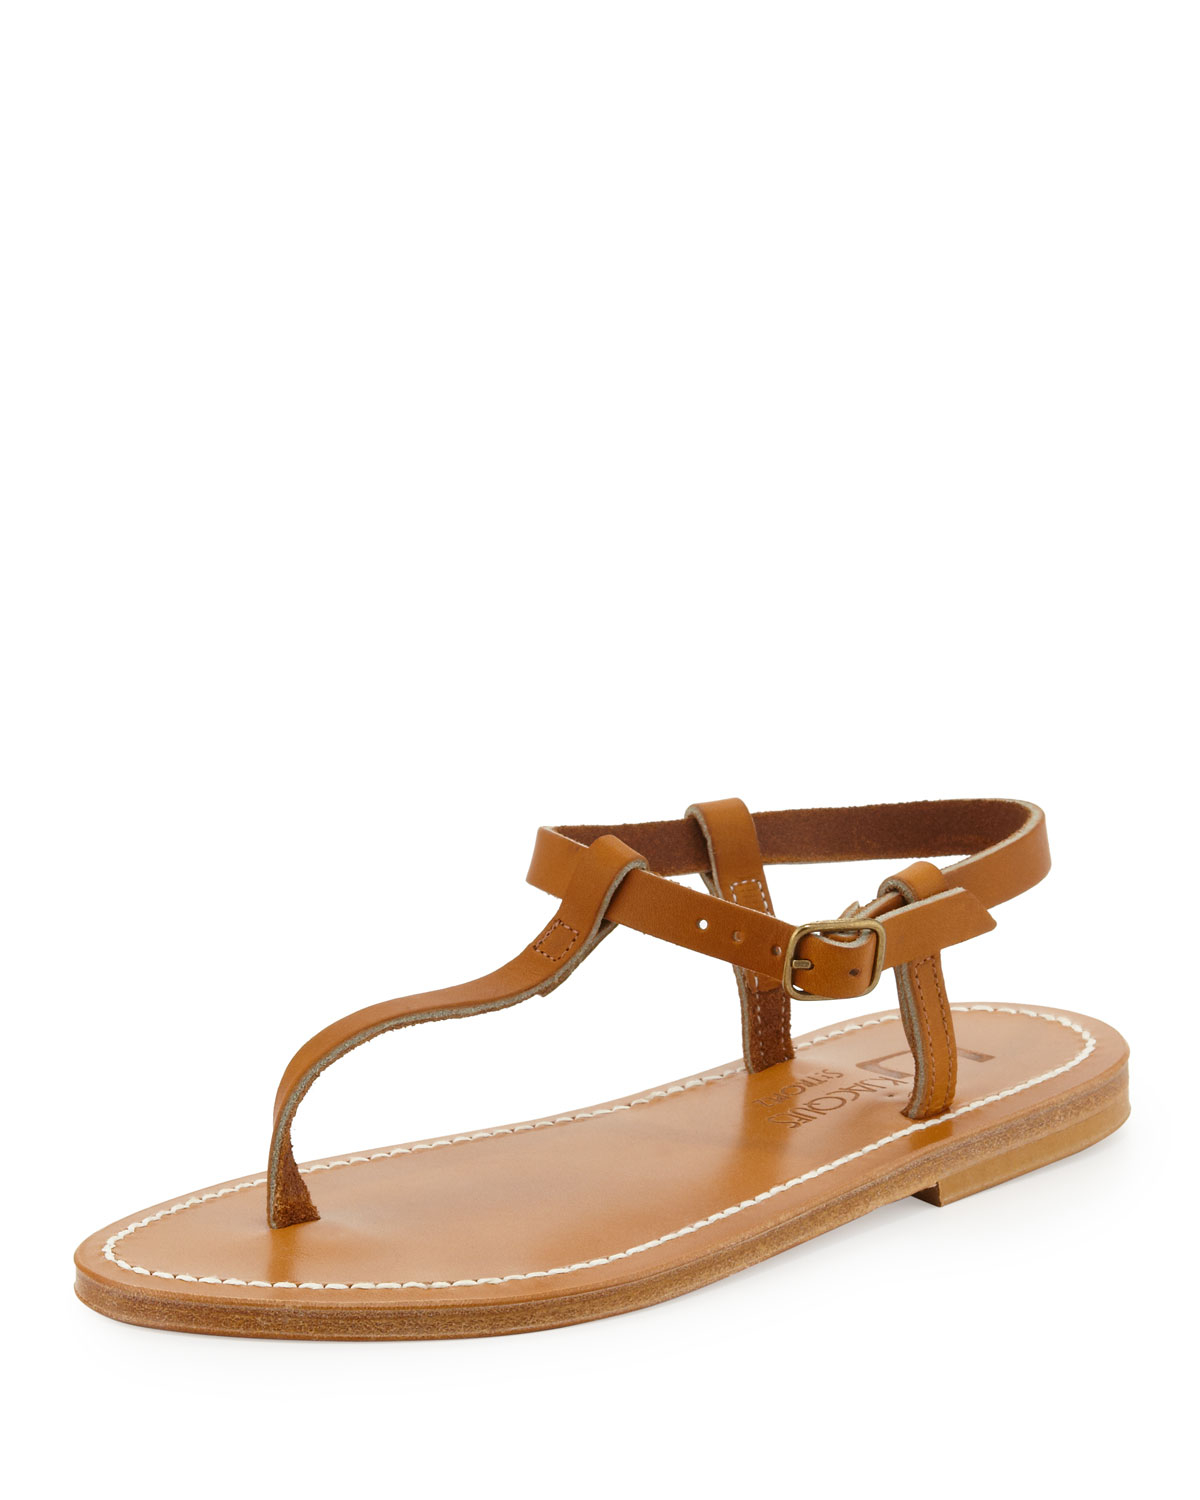 K. Jacques Petrone Leather Thong Sandal in Natural - Lyst